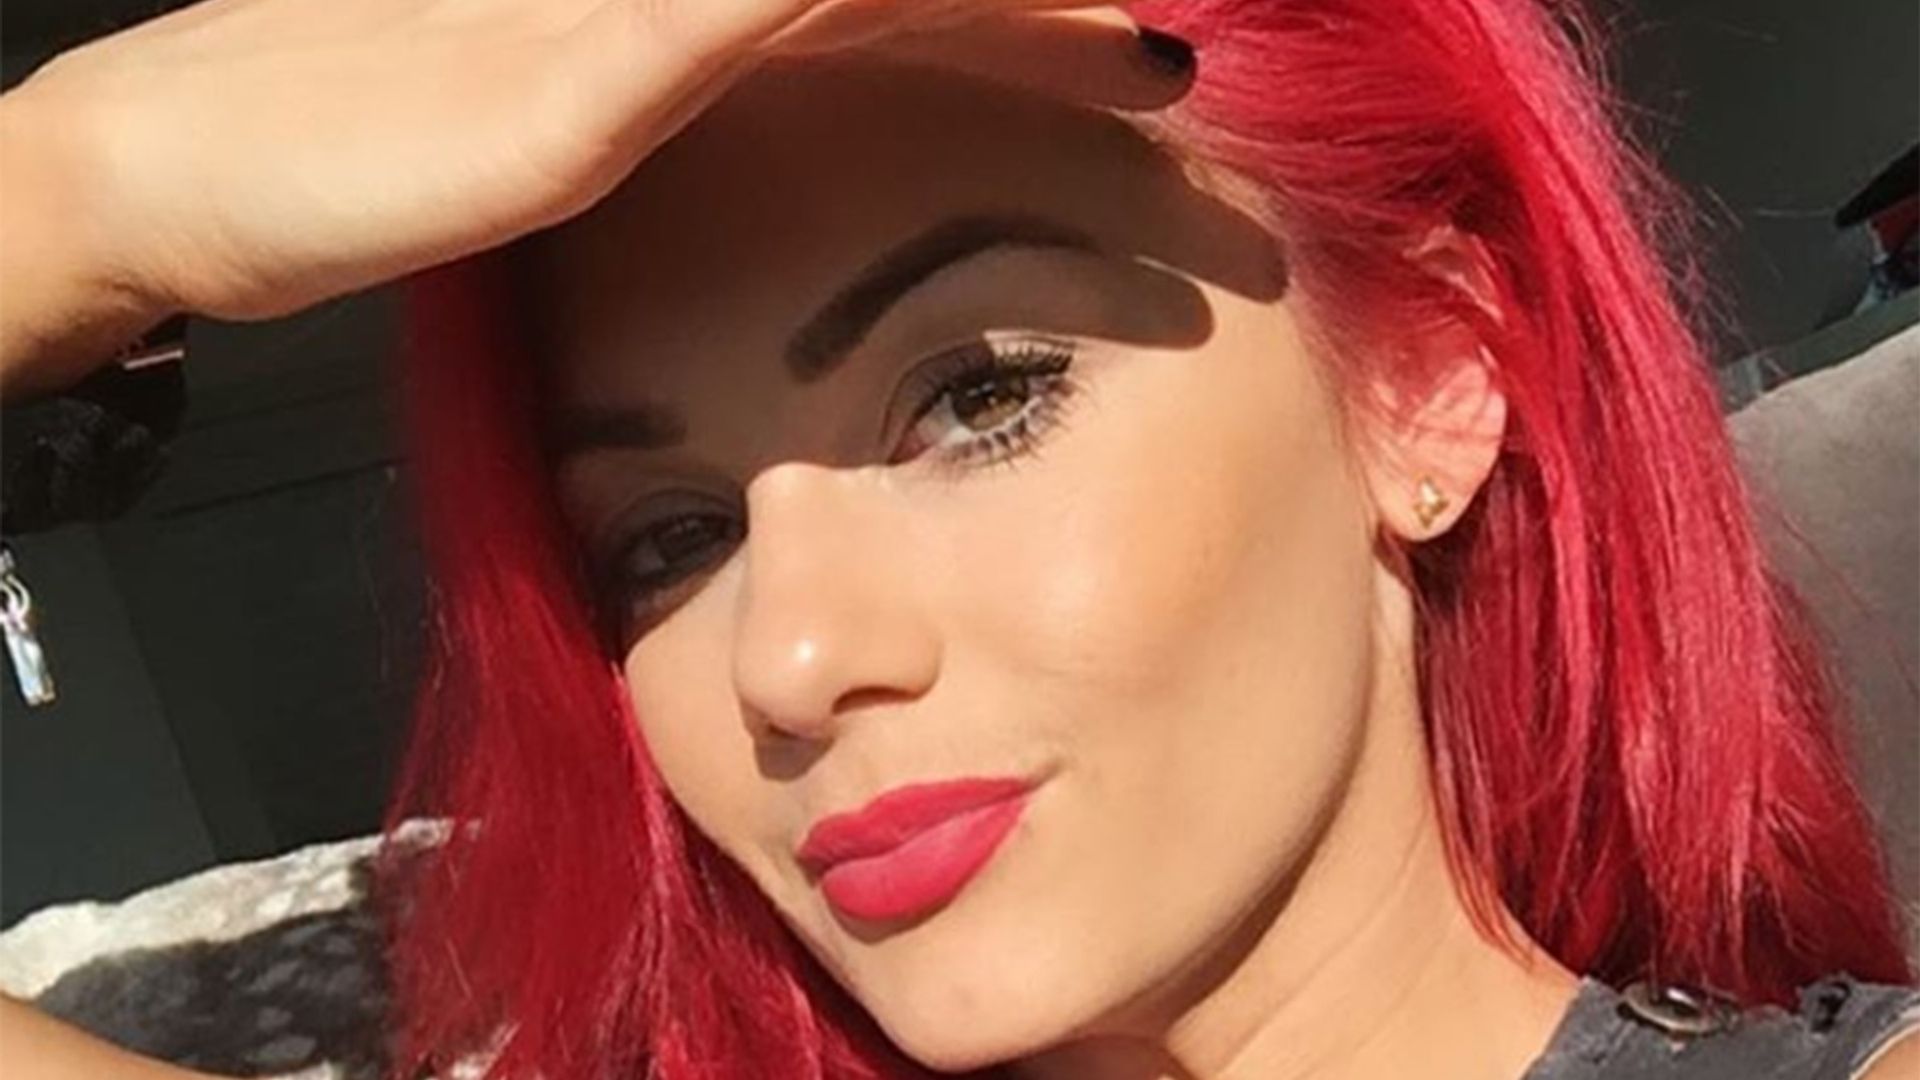 dianne buswell